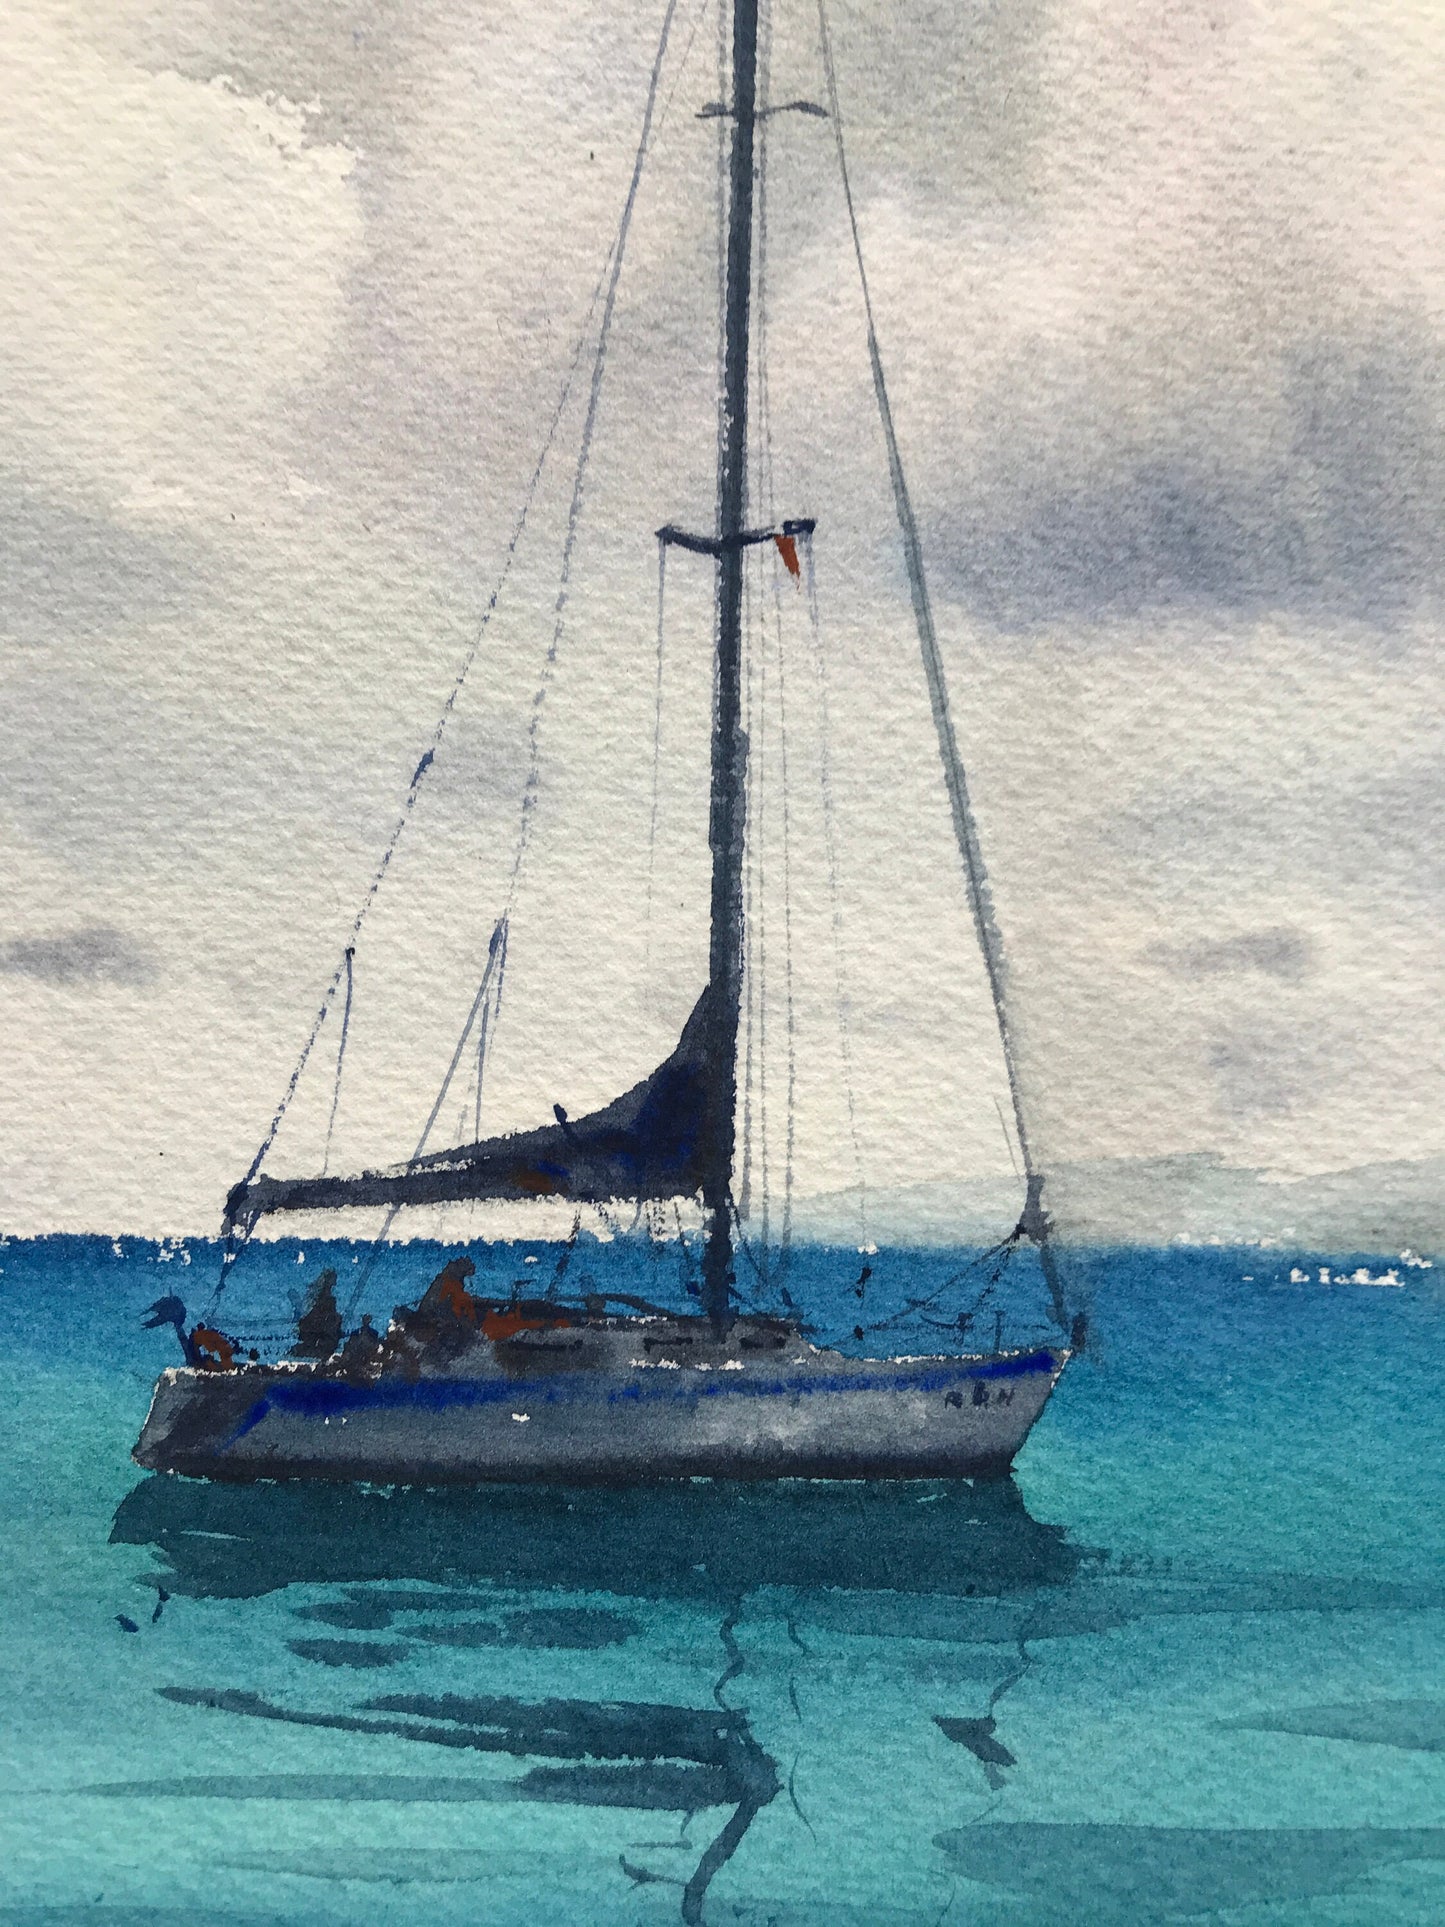 Sailboat Painting Original, Watercolour Seascape One Of a Kind Artwork, Gift for Him, Blue Sea, Yachting Art